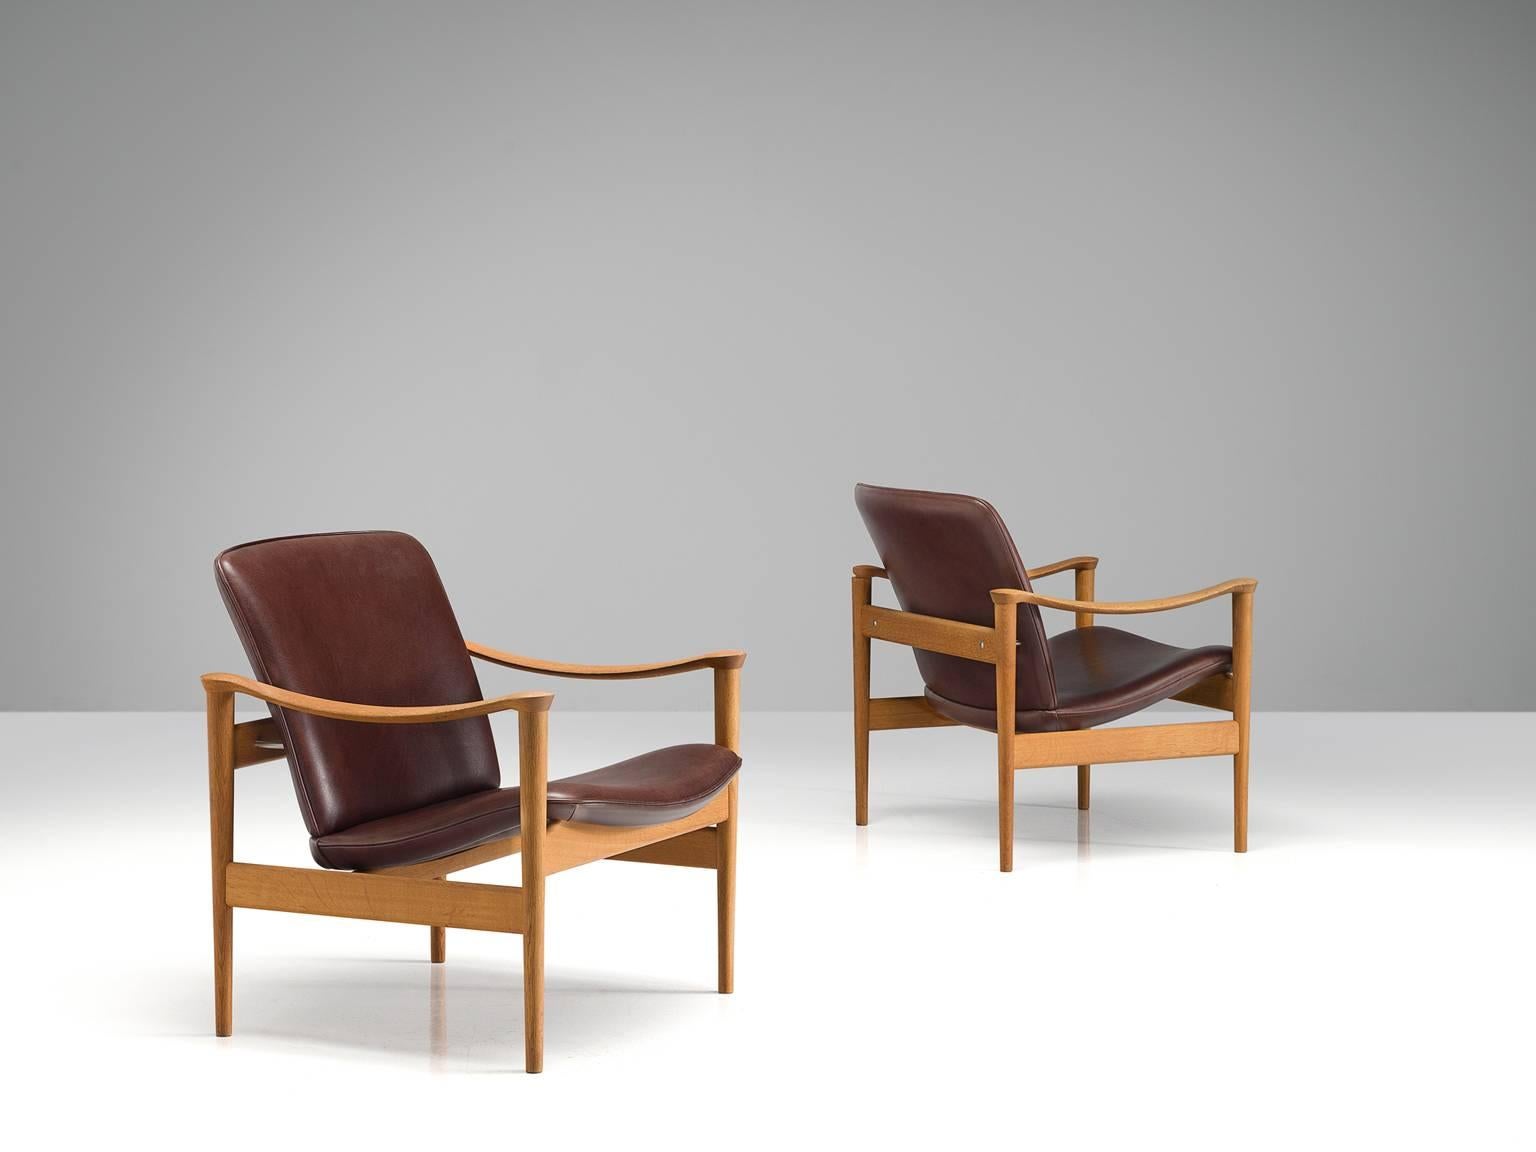 Fredrik A. Kayser for Vatne Lenestolfabrikk, armchairs model 711, oak and faux leather, Norway, 1960.

This set of chairs is designed by Frederik A. Kayser and executed by Vatne Lenestolfabrikk. The armchair are executed in oak, leatherette and